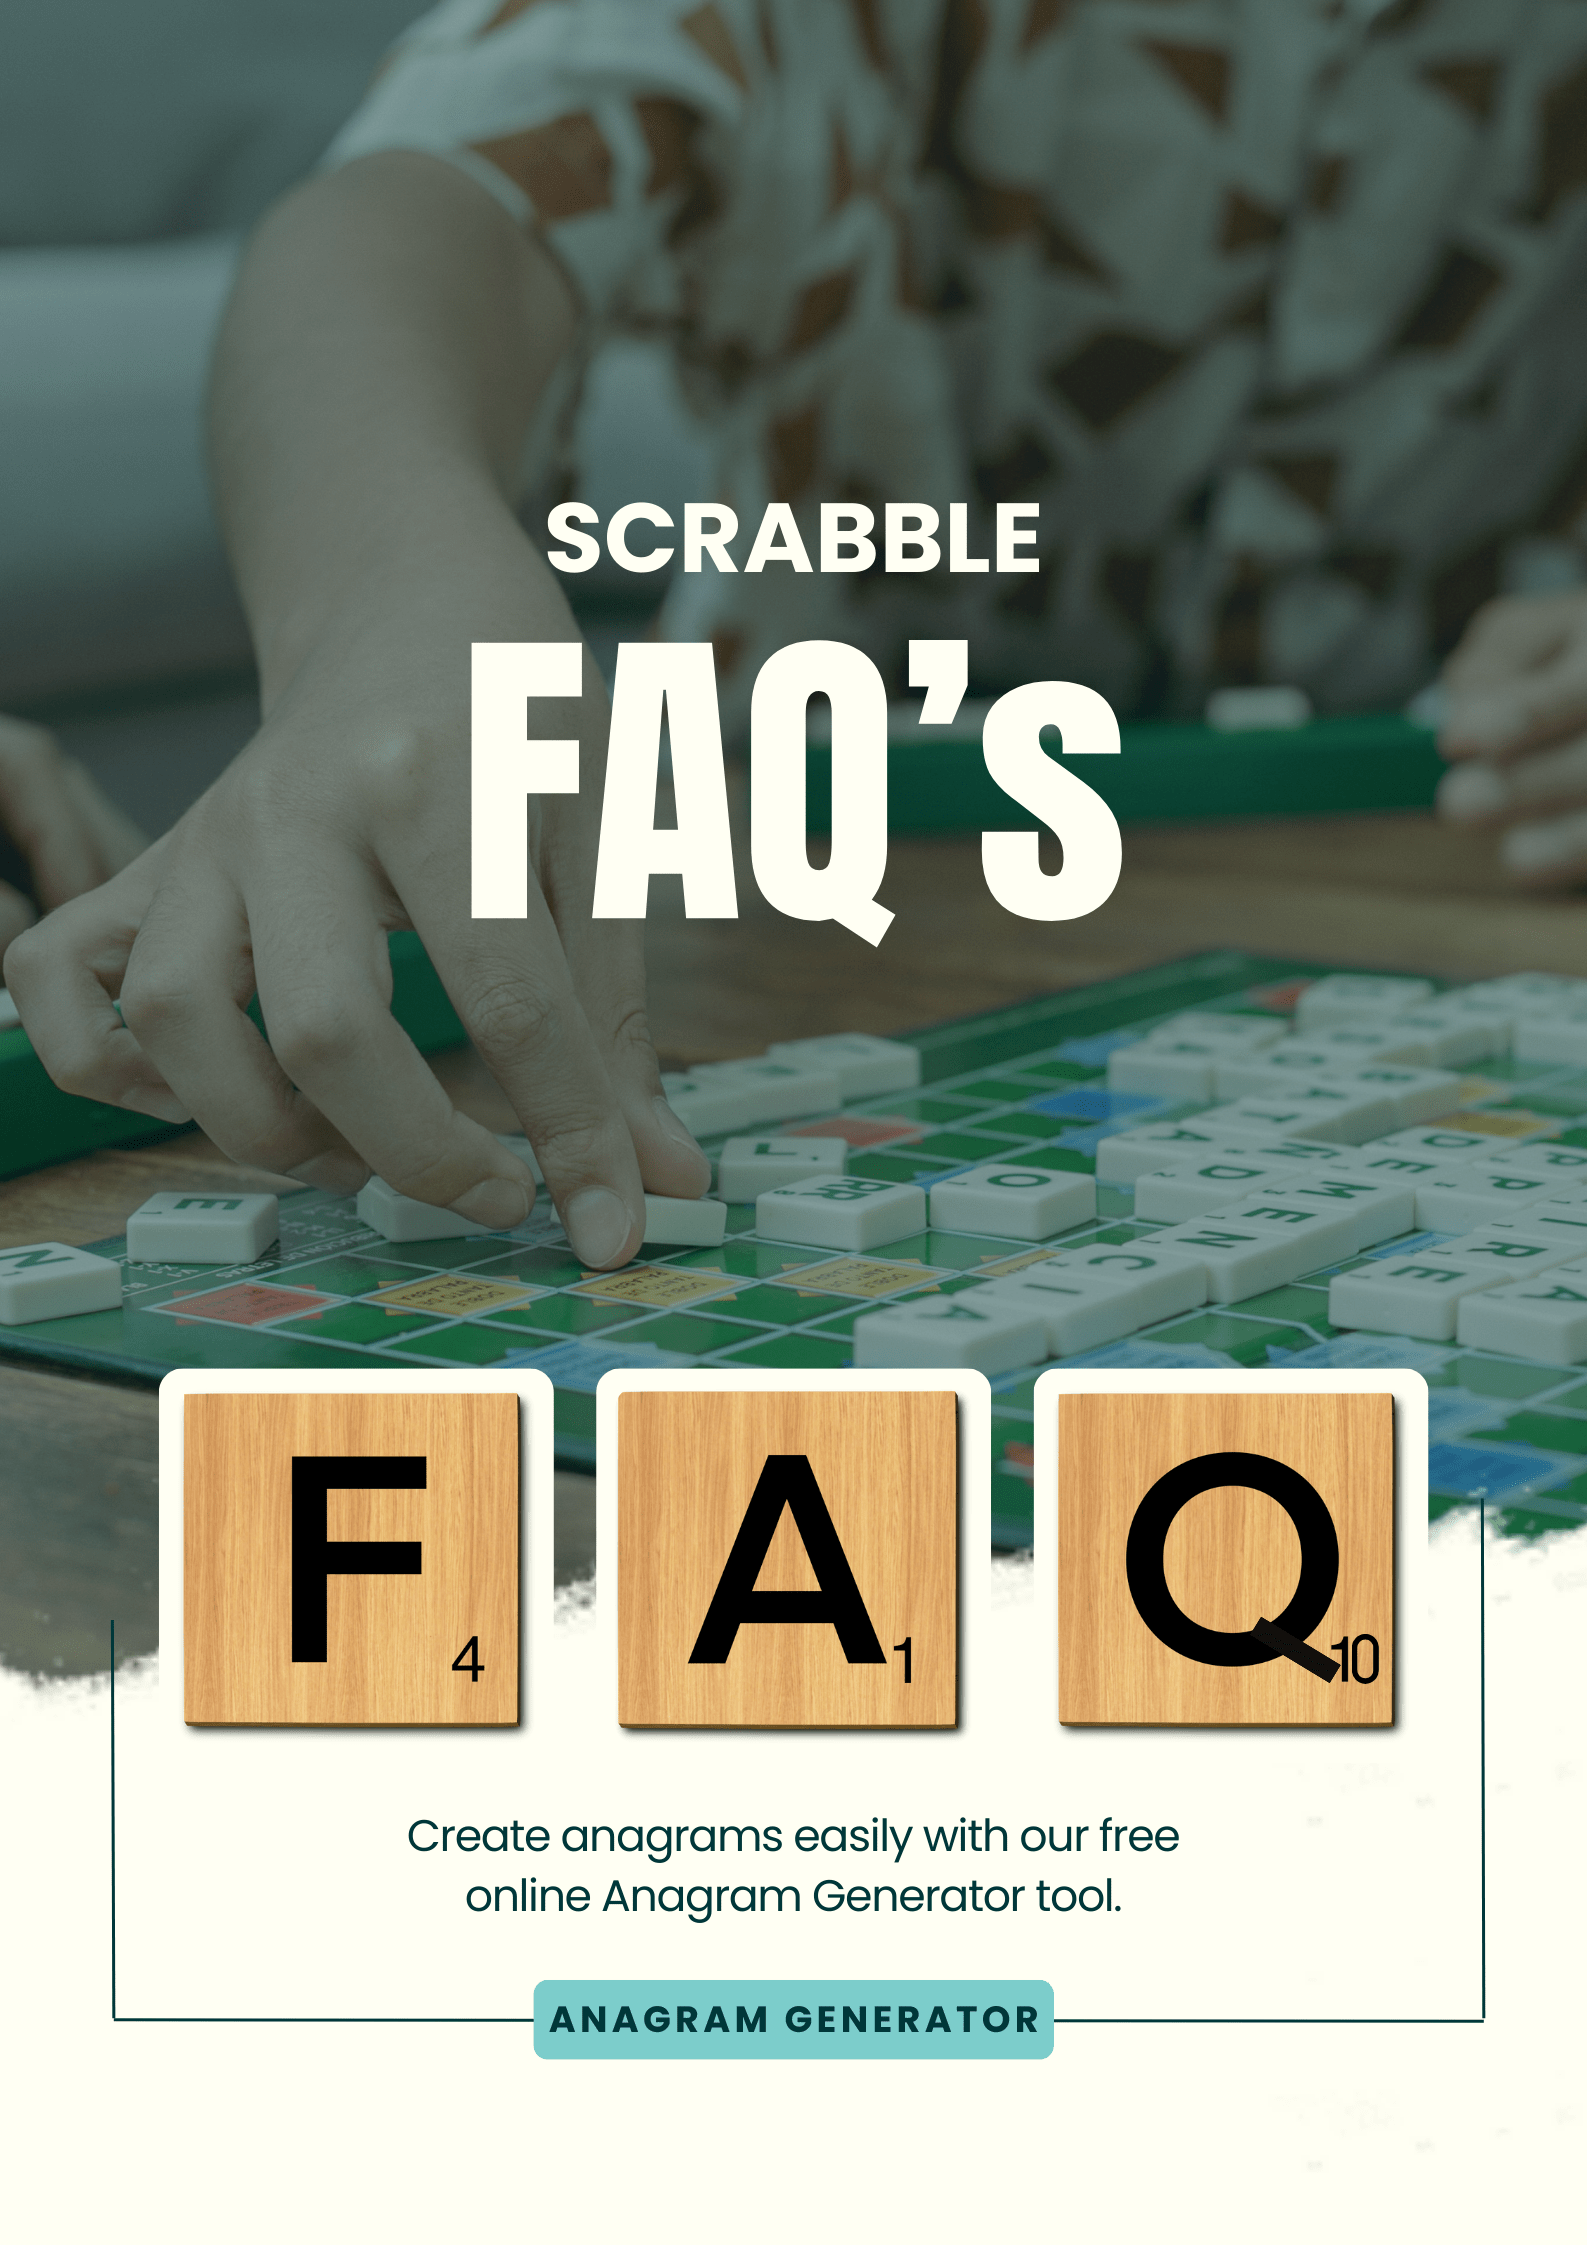 Person playing scrabble with letters spelling "faq's" highlighted; advertisement for an online anagram generator tool.